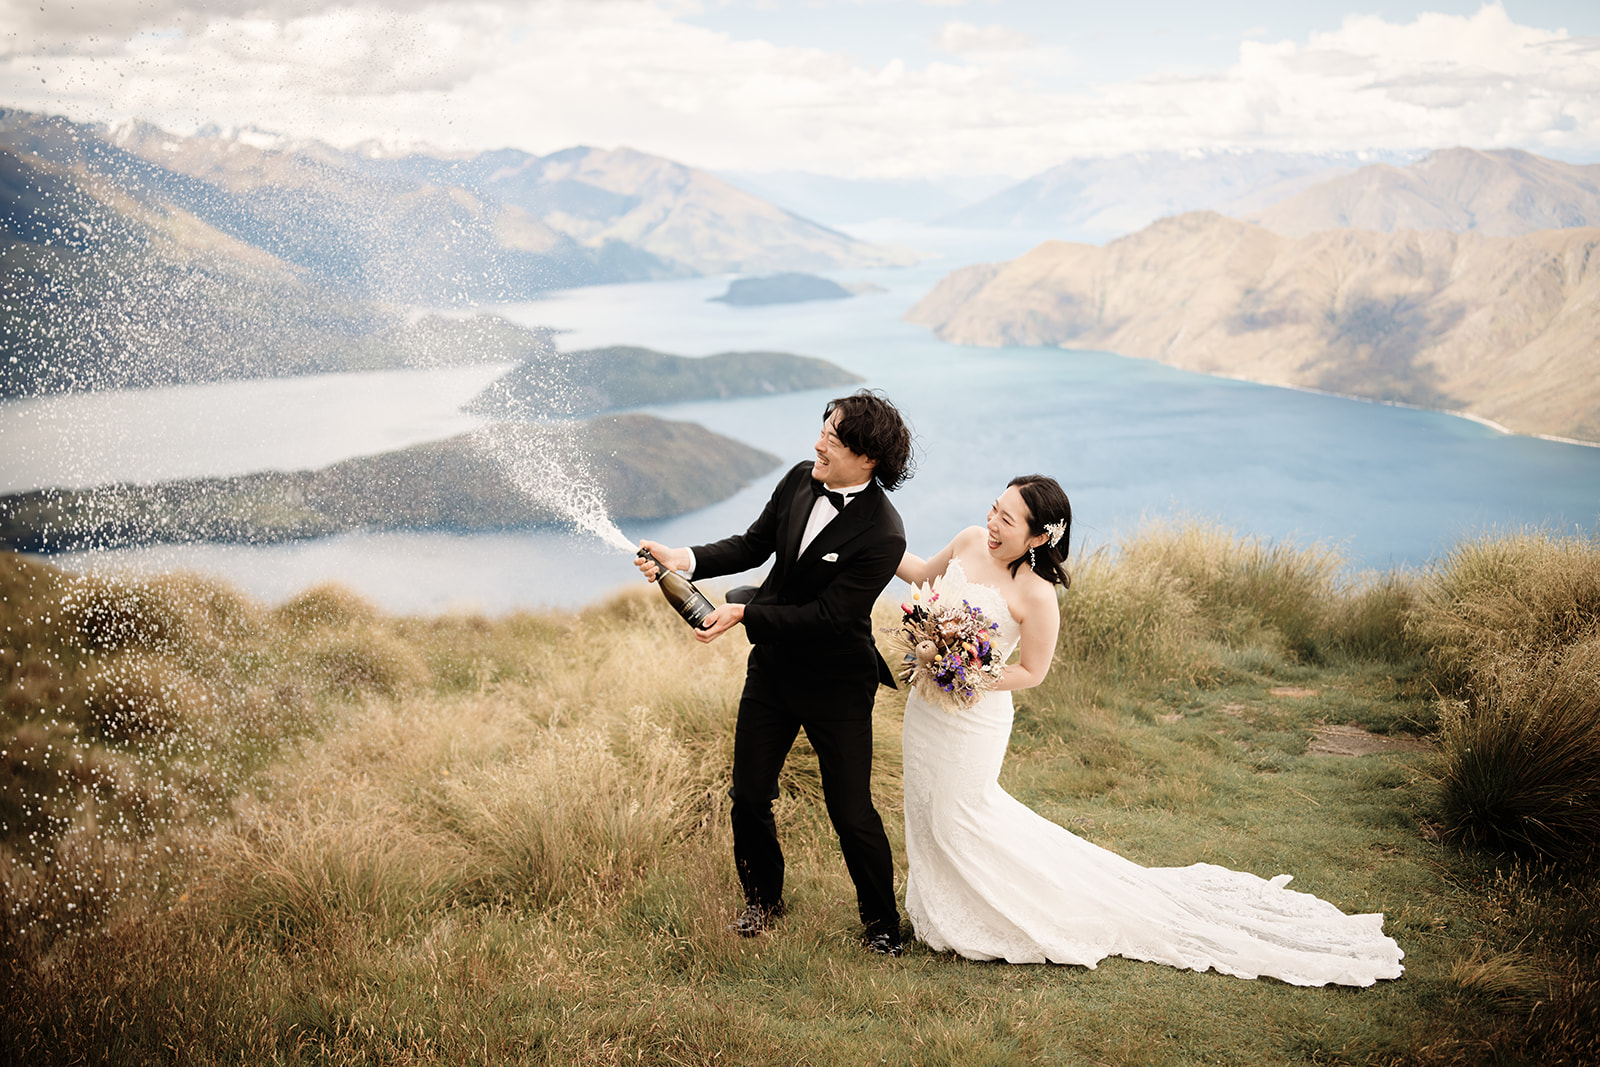 Queenstown Wedding Photographer A bride and groom celebrating their 結婚式 by spraying champagne on top of a mountain in クイーンズタウン, ニュージーラ